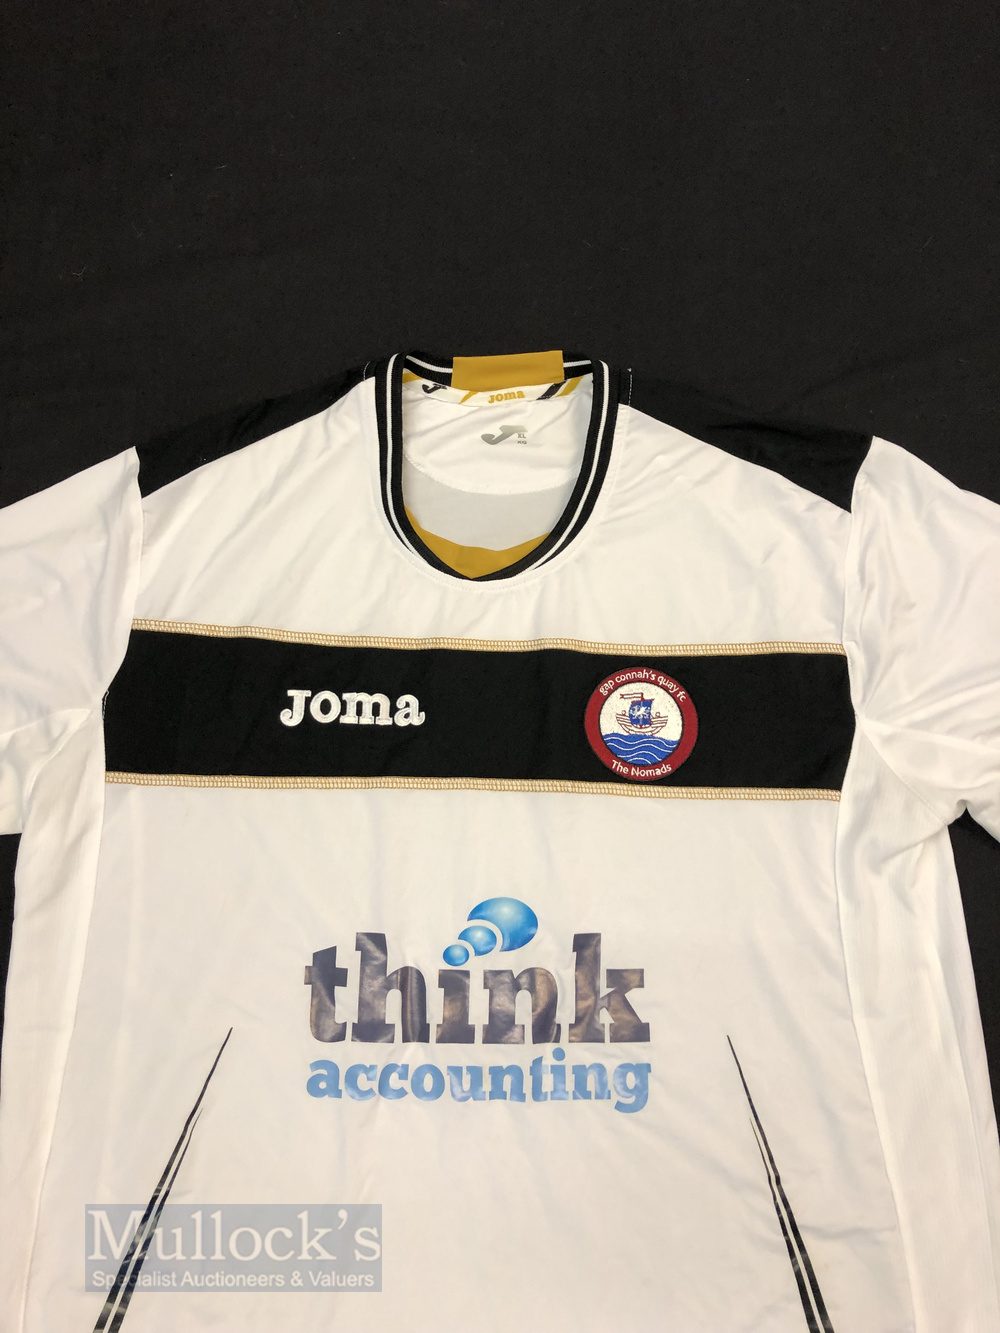 Connah’s Quay ‘The Nomads’ Away football shirt size XL, in white and black, Joma, short sleeve - Image 2 of 2